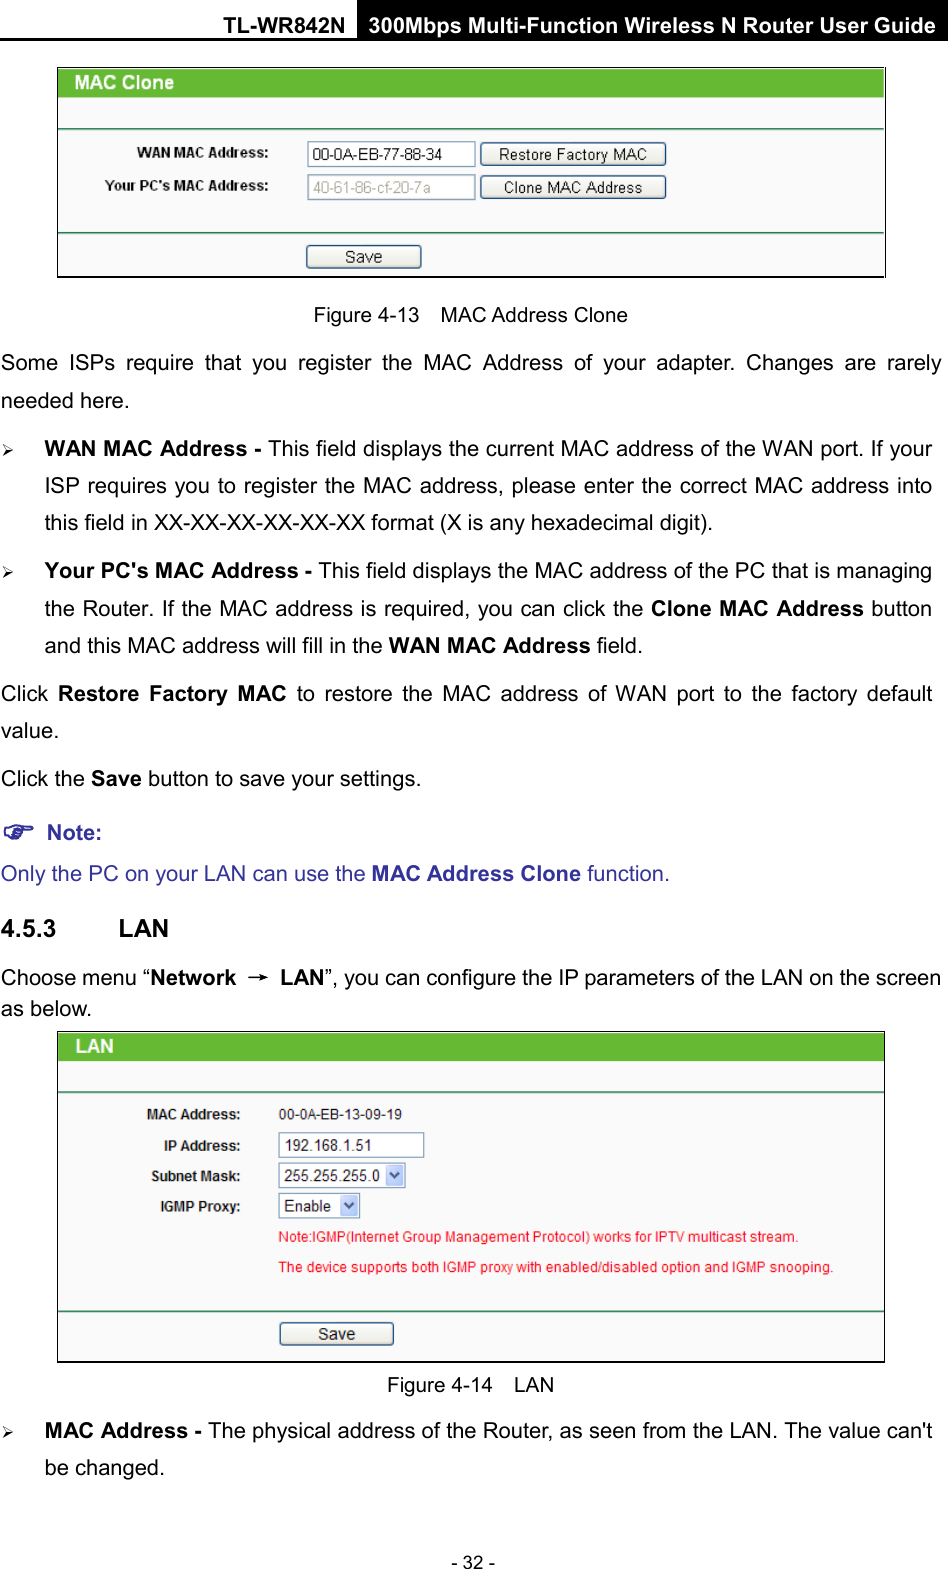 TL-WR842N 300Mbps Multi-Function Wireless N Router User Guide  - 32 -  Figure 4-13  MAC Address Clone Some ISPs require that you register the MAC Address of your adapter.  Changes are rarely needed here.  WAN MAC Address - This field displays the current MAC address of the WAN port. If your ISP requires you to register the MAC address, please enter the correct MAC address into this field in XX-XX-XX-XX-XX-XX format (X is any hexadecimal digit).    Your PC&apos;s MAC Address - This field displays the MAC address of the PC that is managing the Router. If the MAC address is required, you can click the Clone MAC Address button and this MAC address will fill in the WAN MAC Address field. Click  Restore Factory MAC to restore the MAC address of WAN port to the factory default value. Click the Save button to save your settings.  Note:   Only the PC on your LAN can use the MAC Address Clone function. 4.5.3 LAN Choose menu “Network → LAN”, you can configure the IP parameters of the LAN on the screen as below.  Figure 4-14  LAN  MAC Address - The physical address of the Router, as seen from the LAN. The value can&apos;t be changed. 